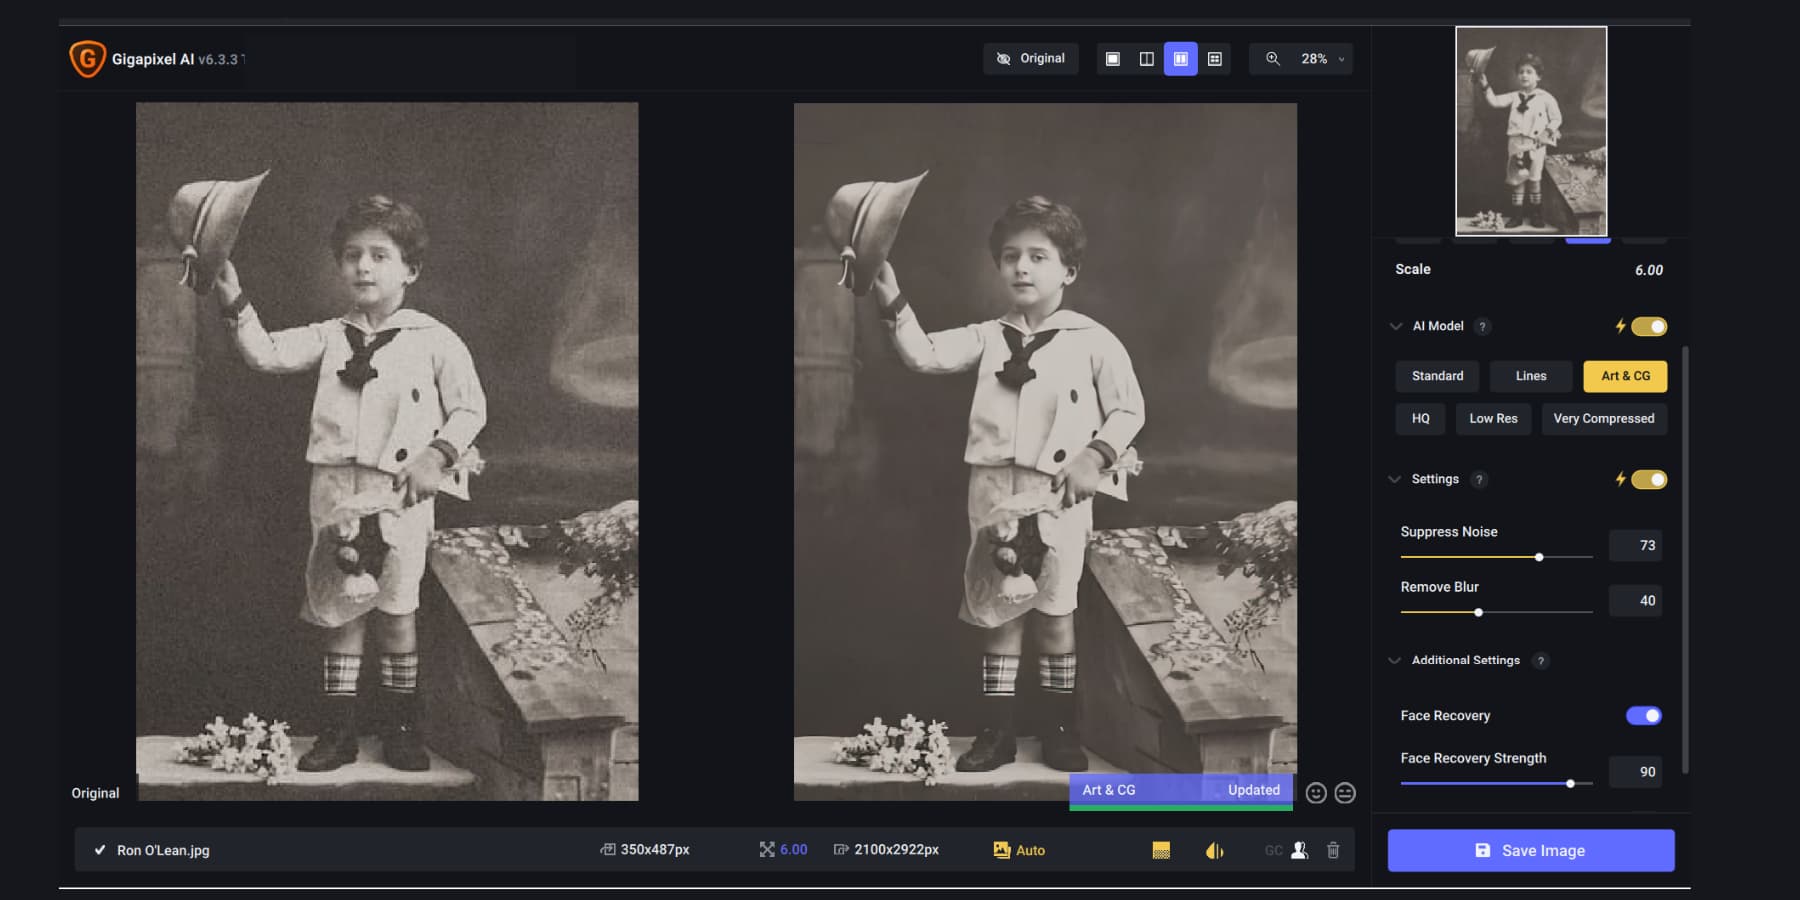 A screenshot of Gigapixel AI's helping to restore an old timey picture